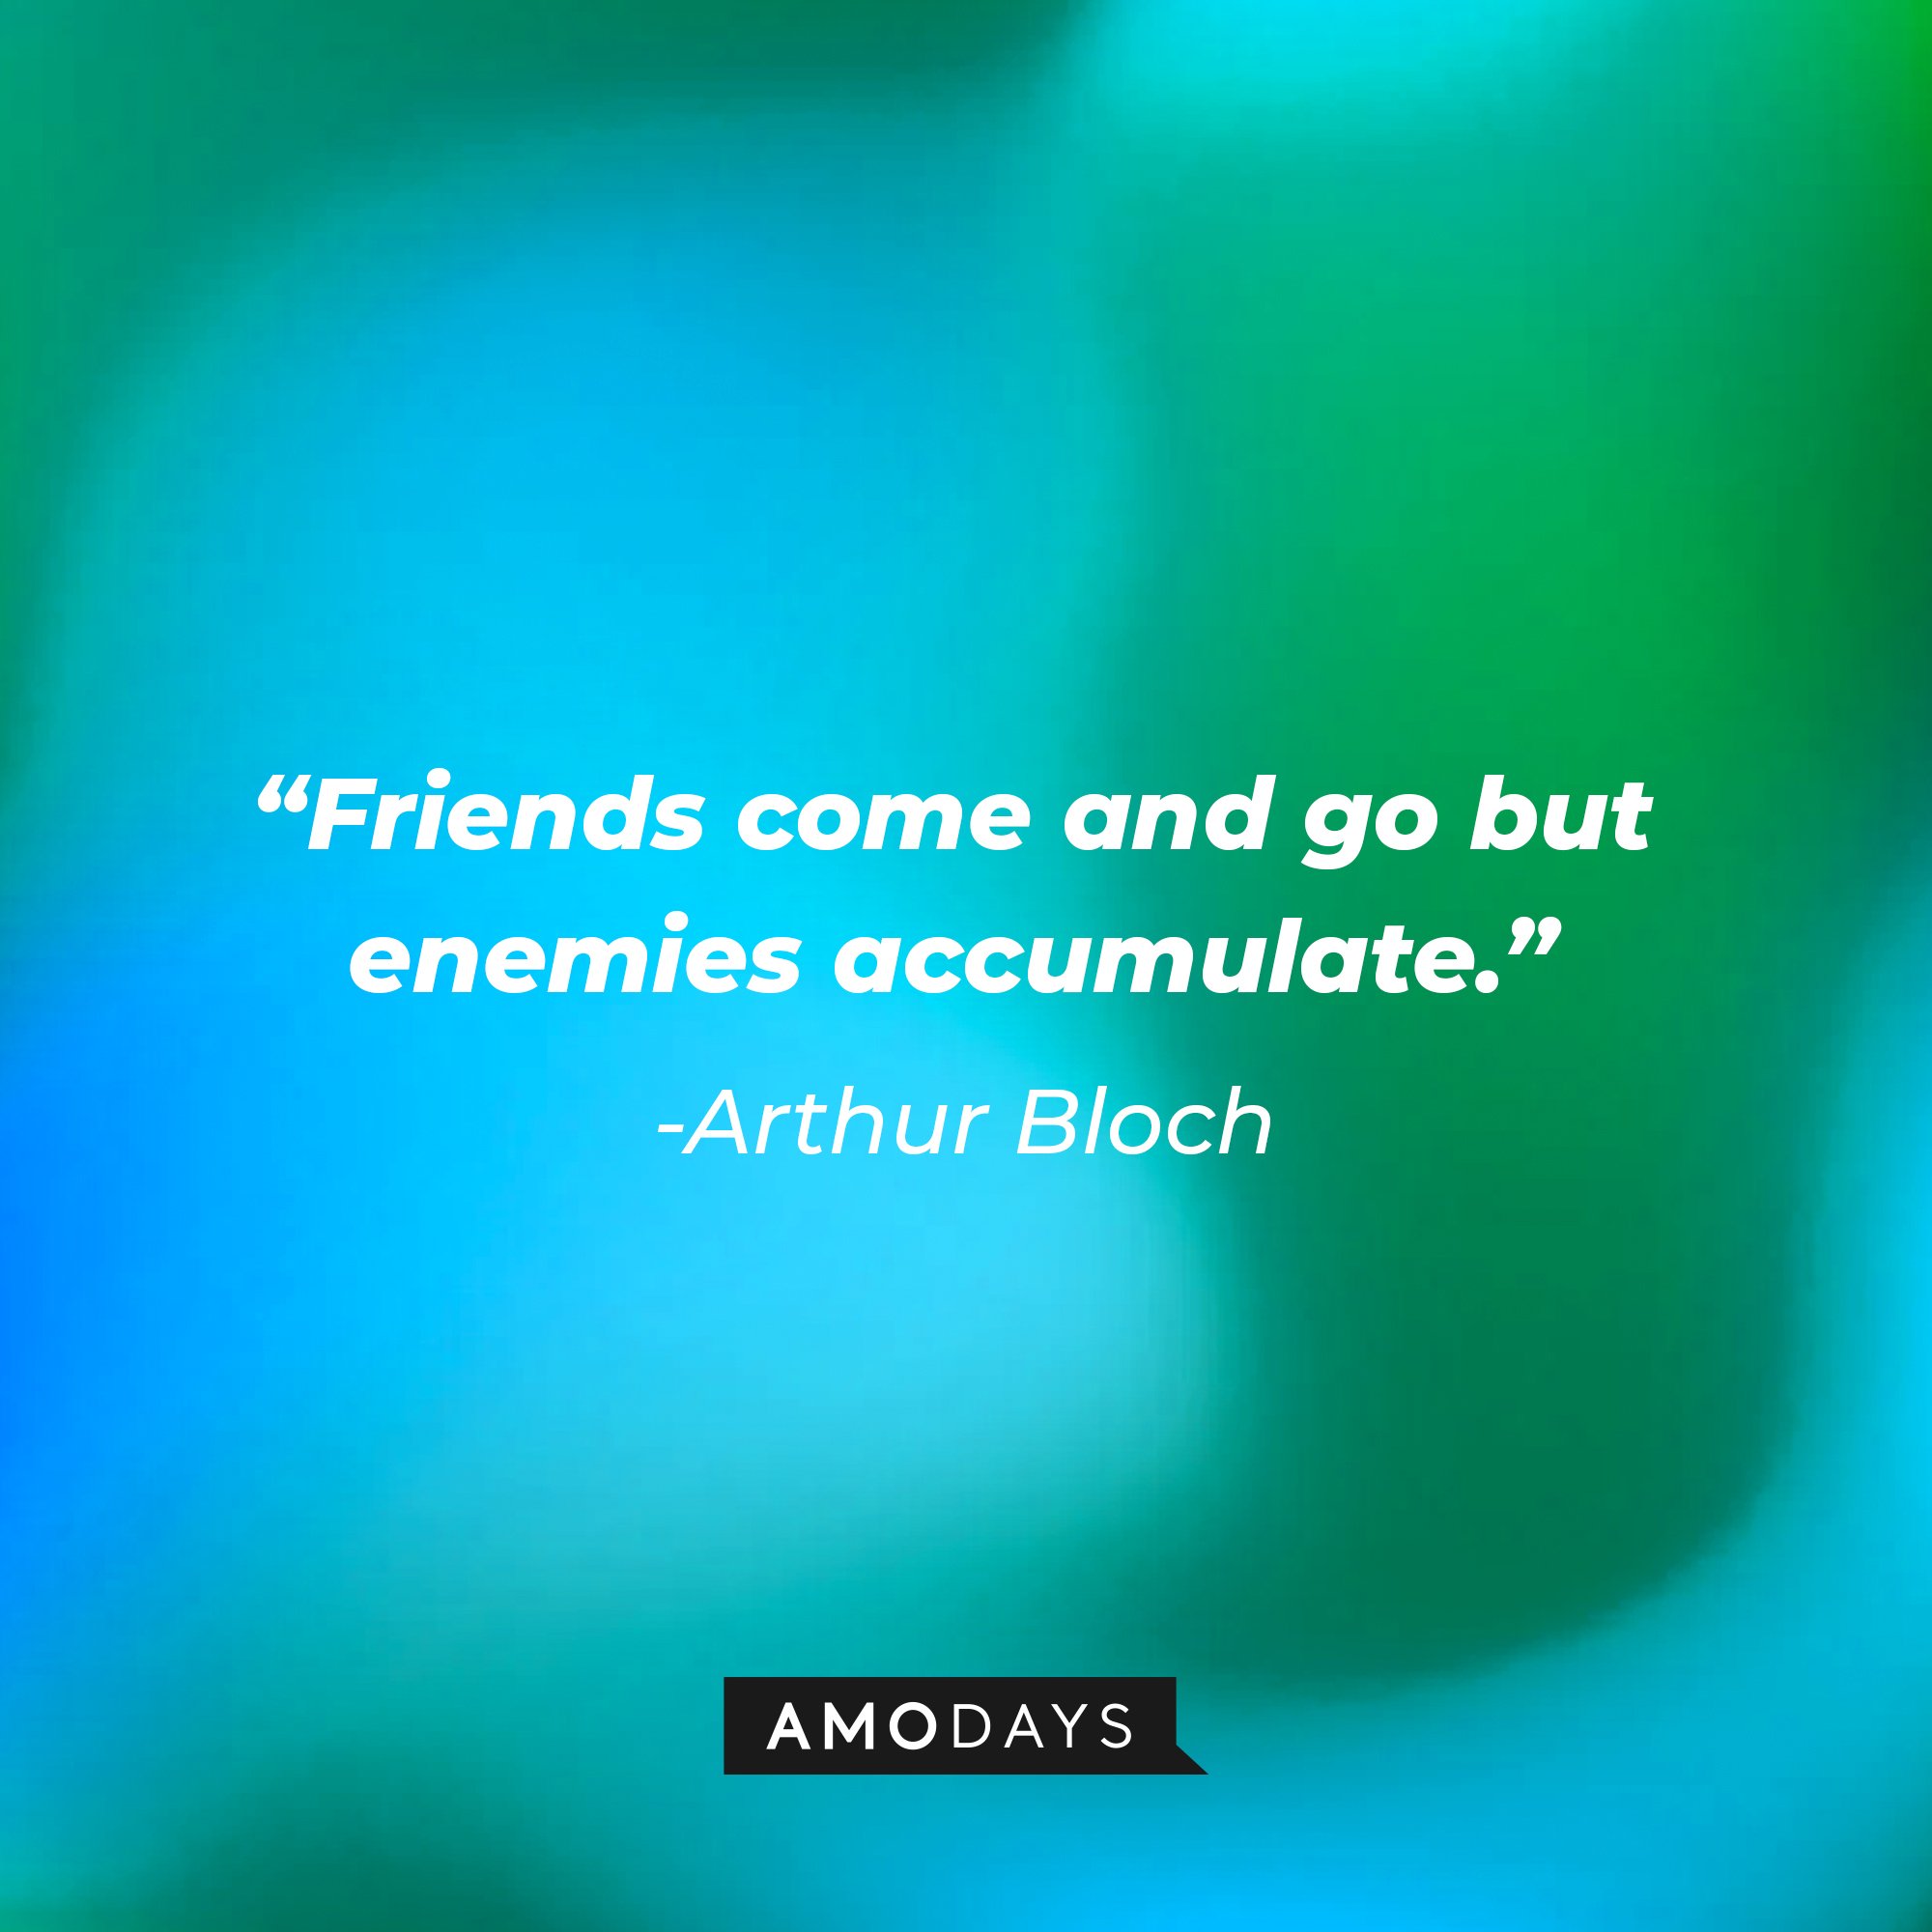    Arthur Bloch’s quote: "Friends come and go, but enemies accumulate."  | Image: AmoDays